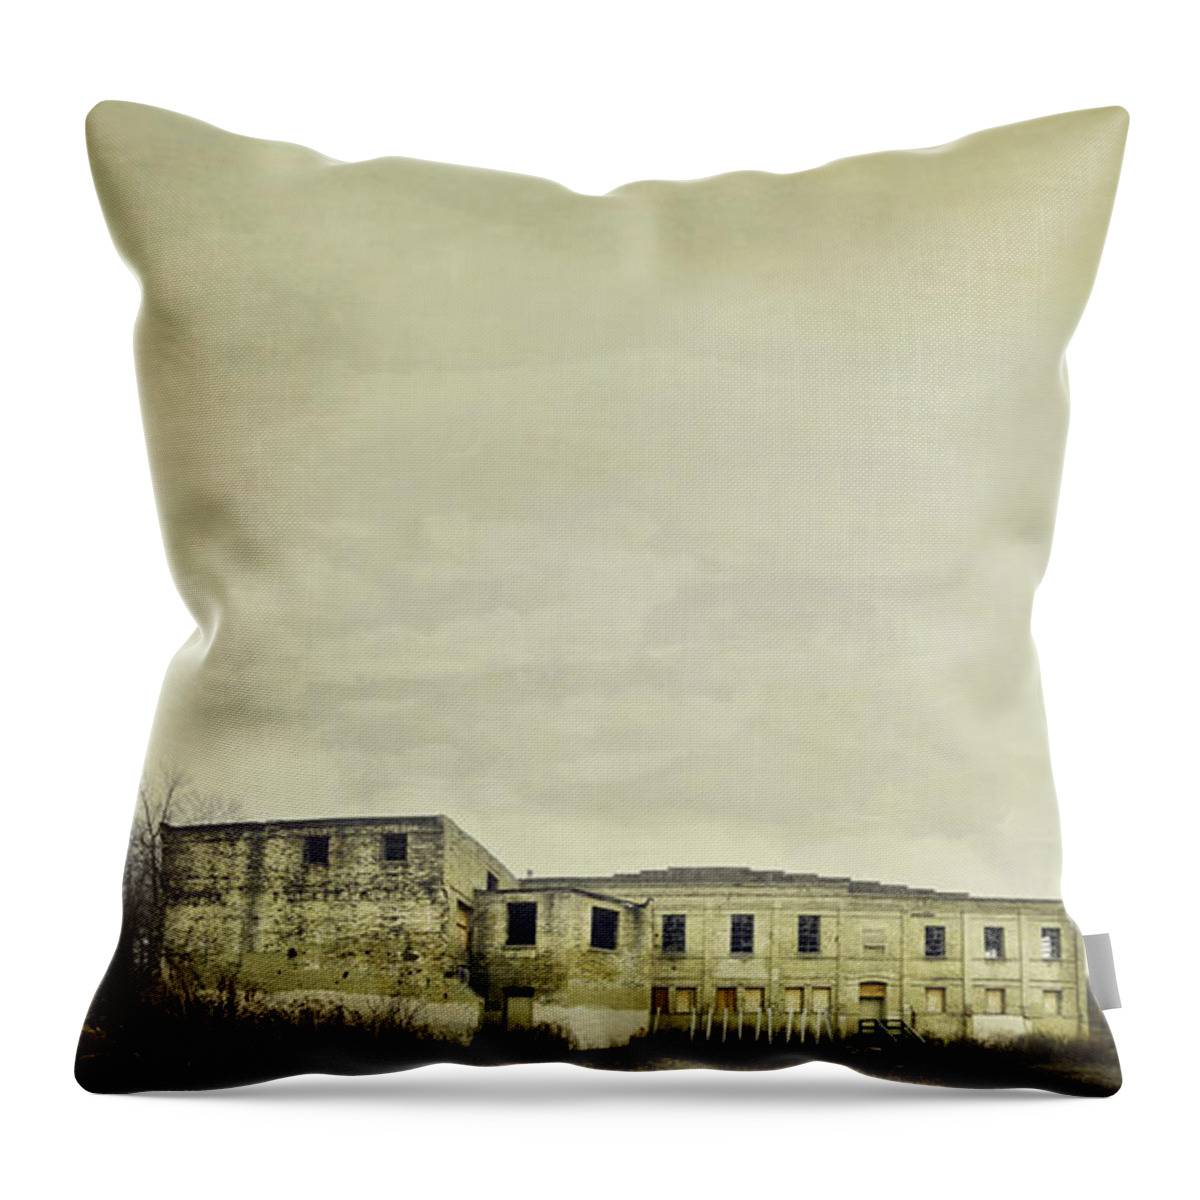 Warehouse Throw Pillow featuring the photograph Urban Ruins by Scott Norris